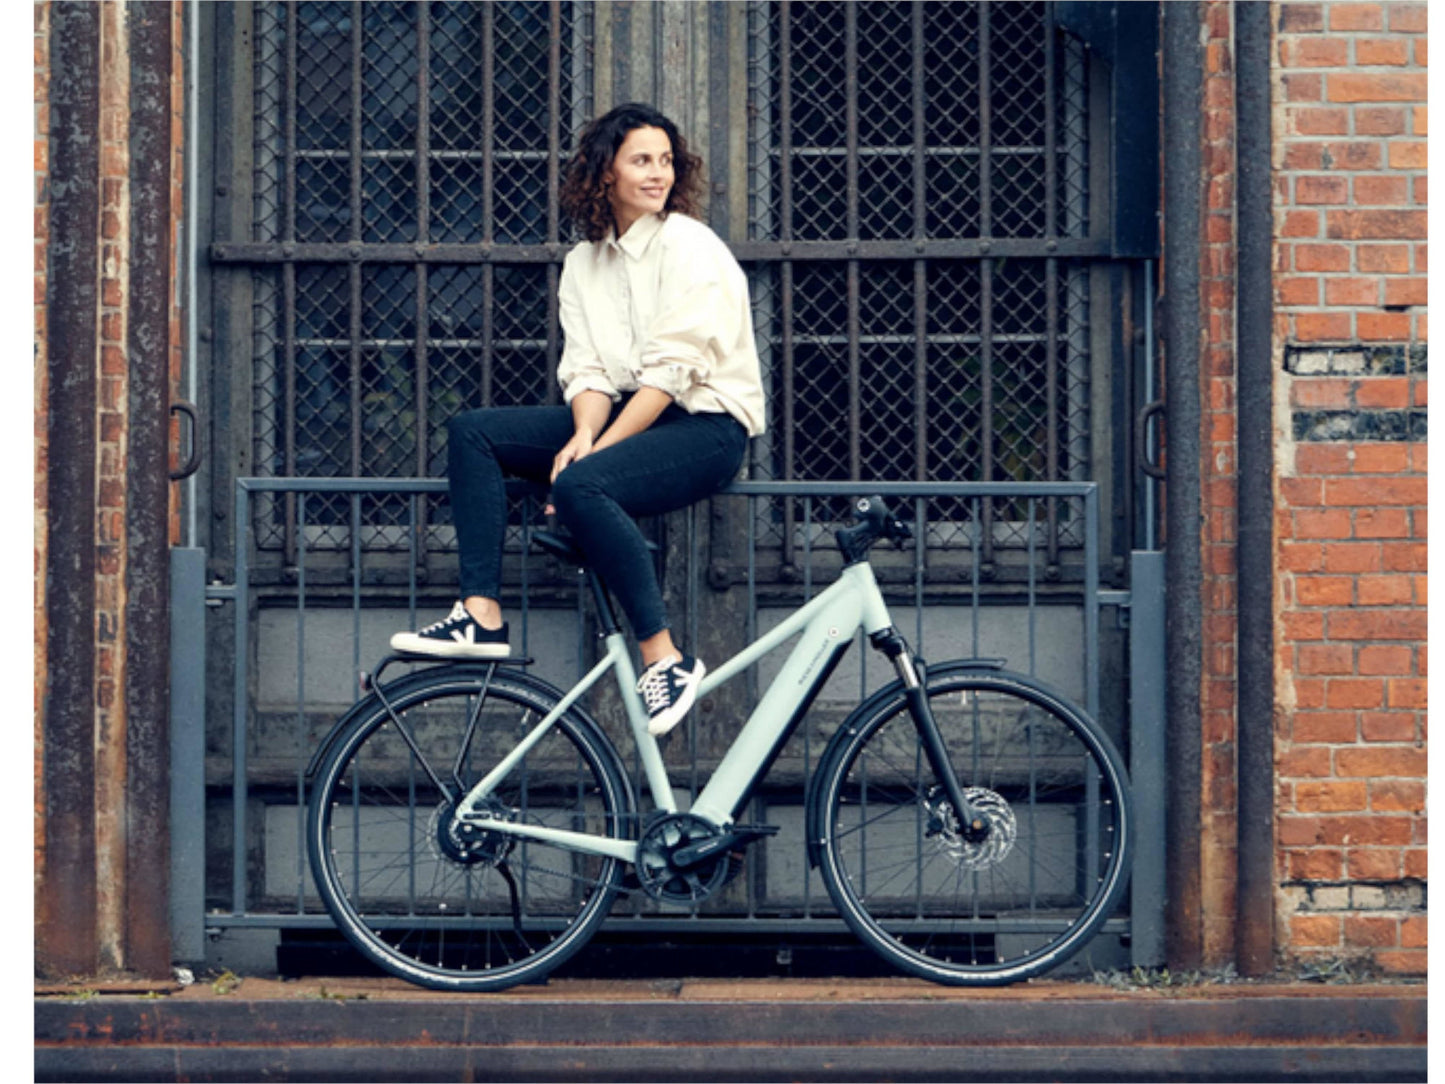 Riese and Muller Roadster Mixte Vario HS eMTB woman sitting with bike in city